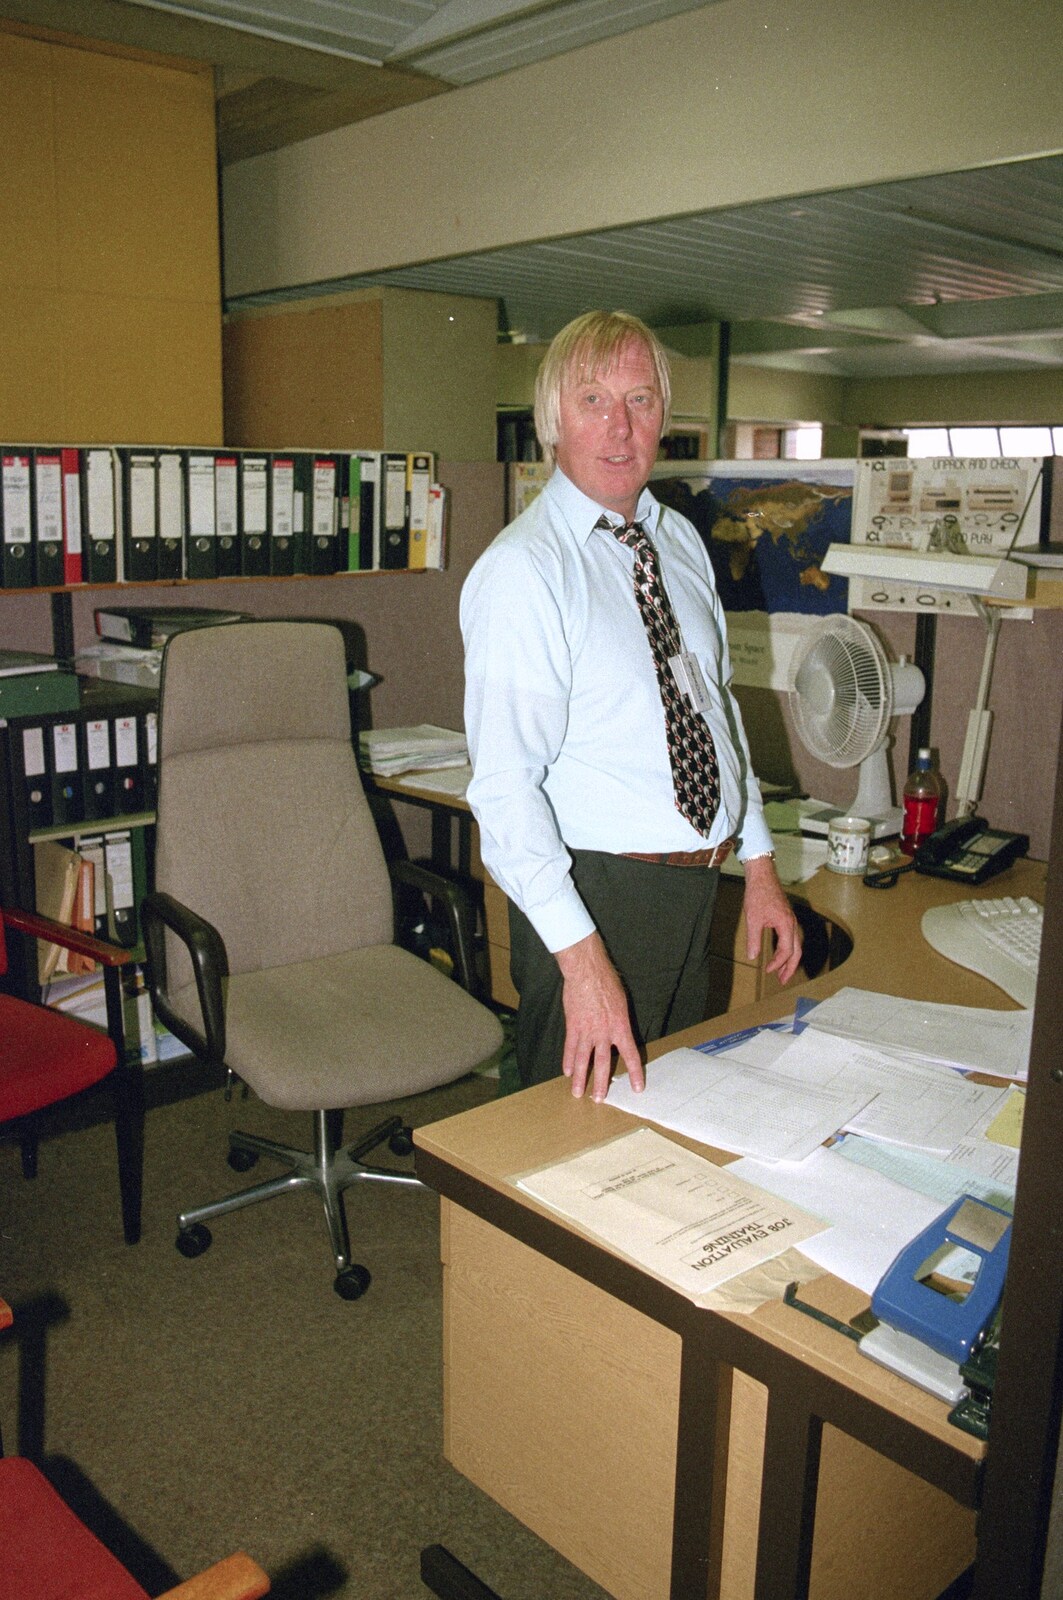 A Last Few Days at CISU, Suffolk County Council, Ipswich - 11th June 2000: Alan Cox in his office cubicle